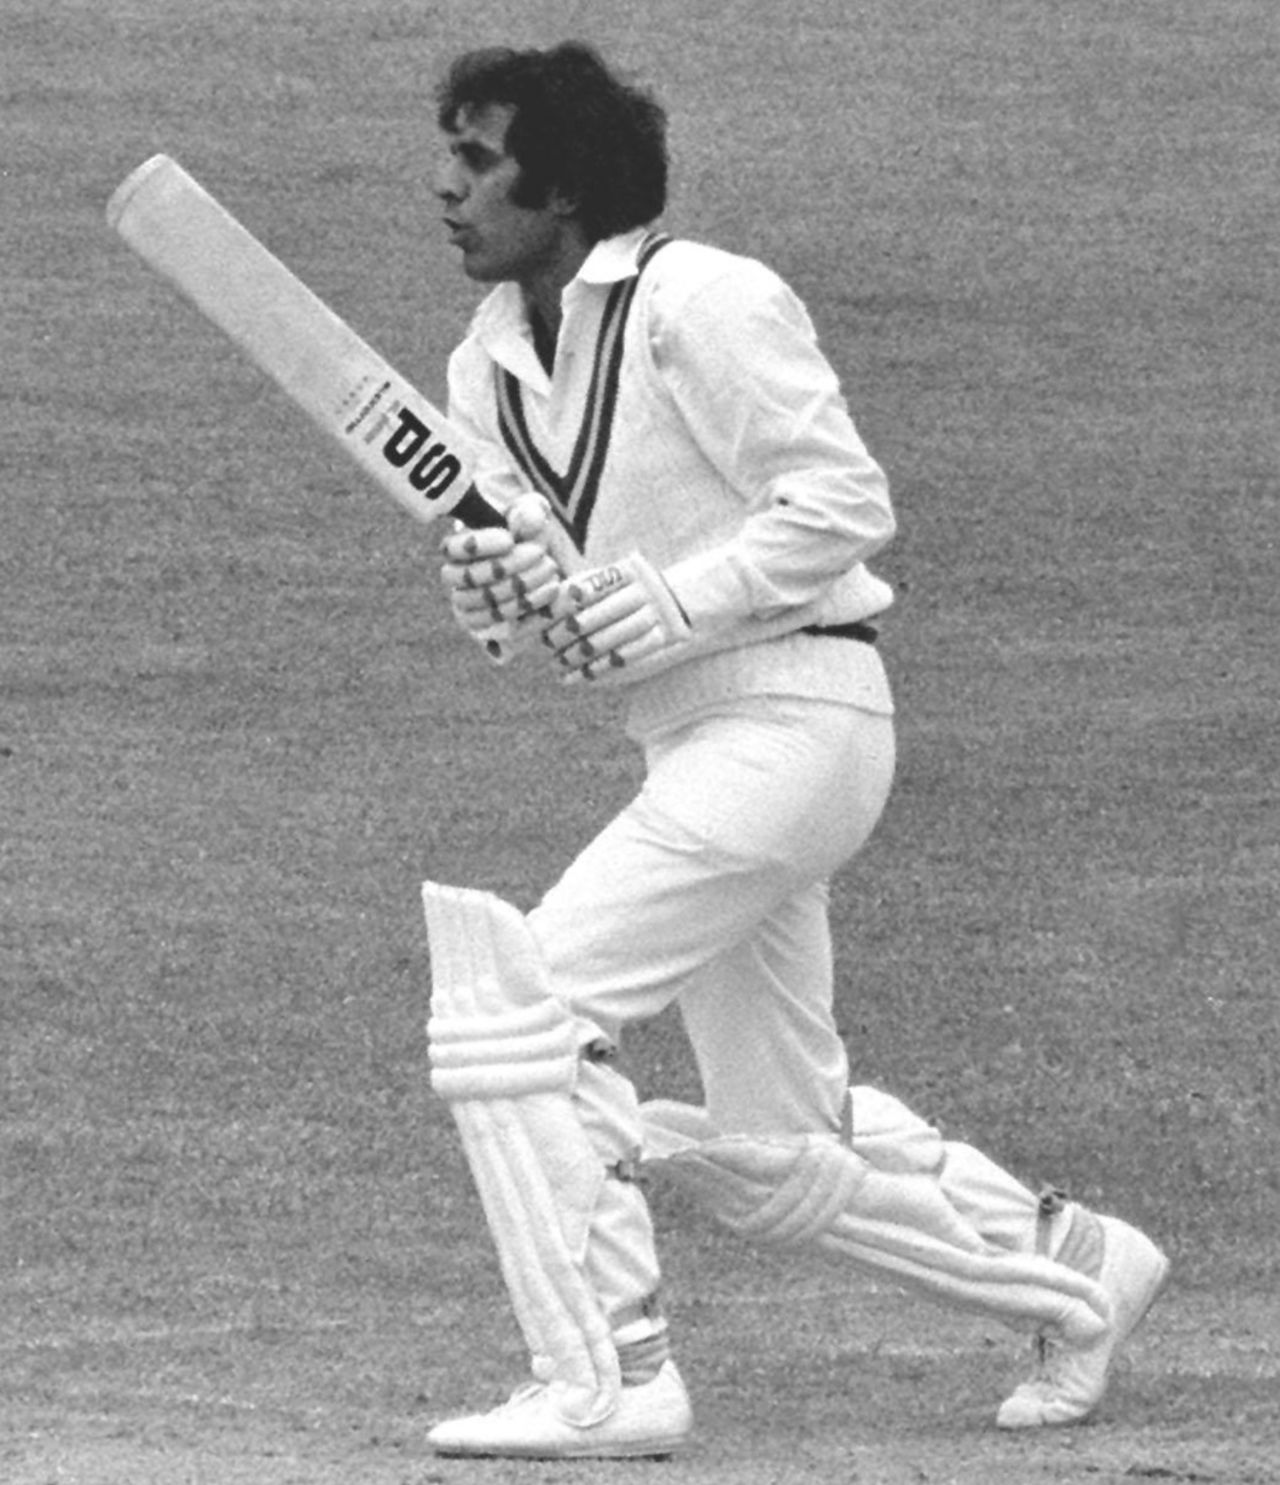 Haroon Rasheed was bowled for 15 by Chris Old, England v Pakistan, 2nd Test, Lord's, 3rd day, July 17, 1978